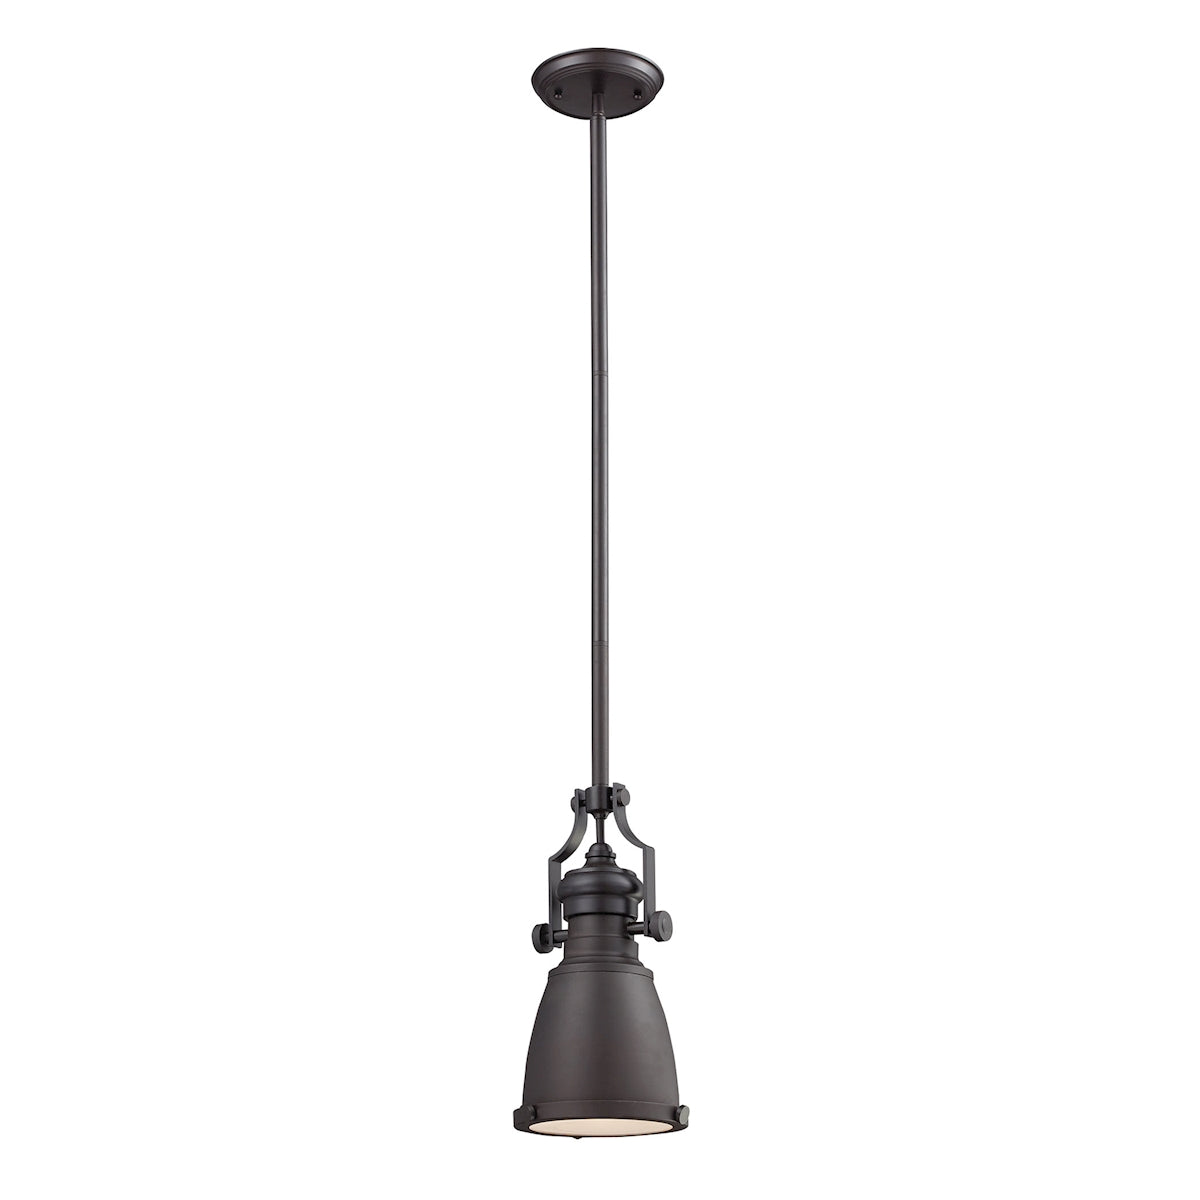 ELK Lighting 66139-1 Chadwick 1-Light Mini Pendant in Oiled Bronze with Matching Shade